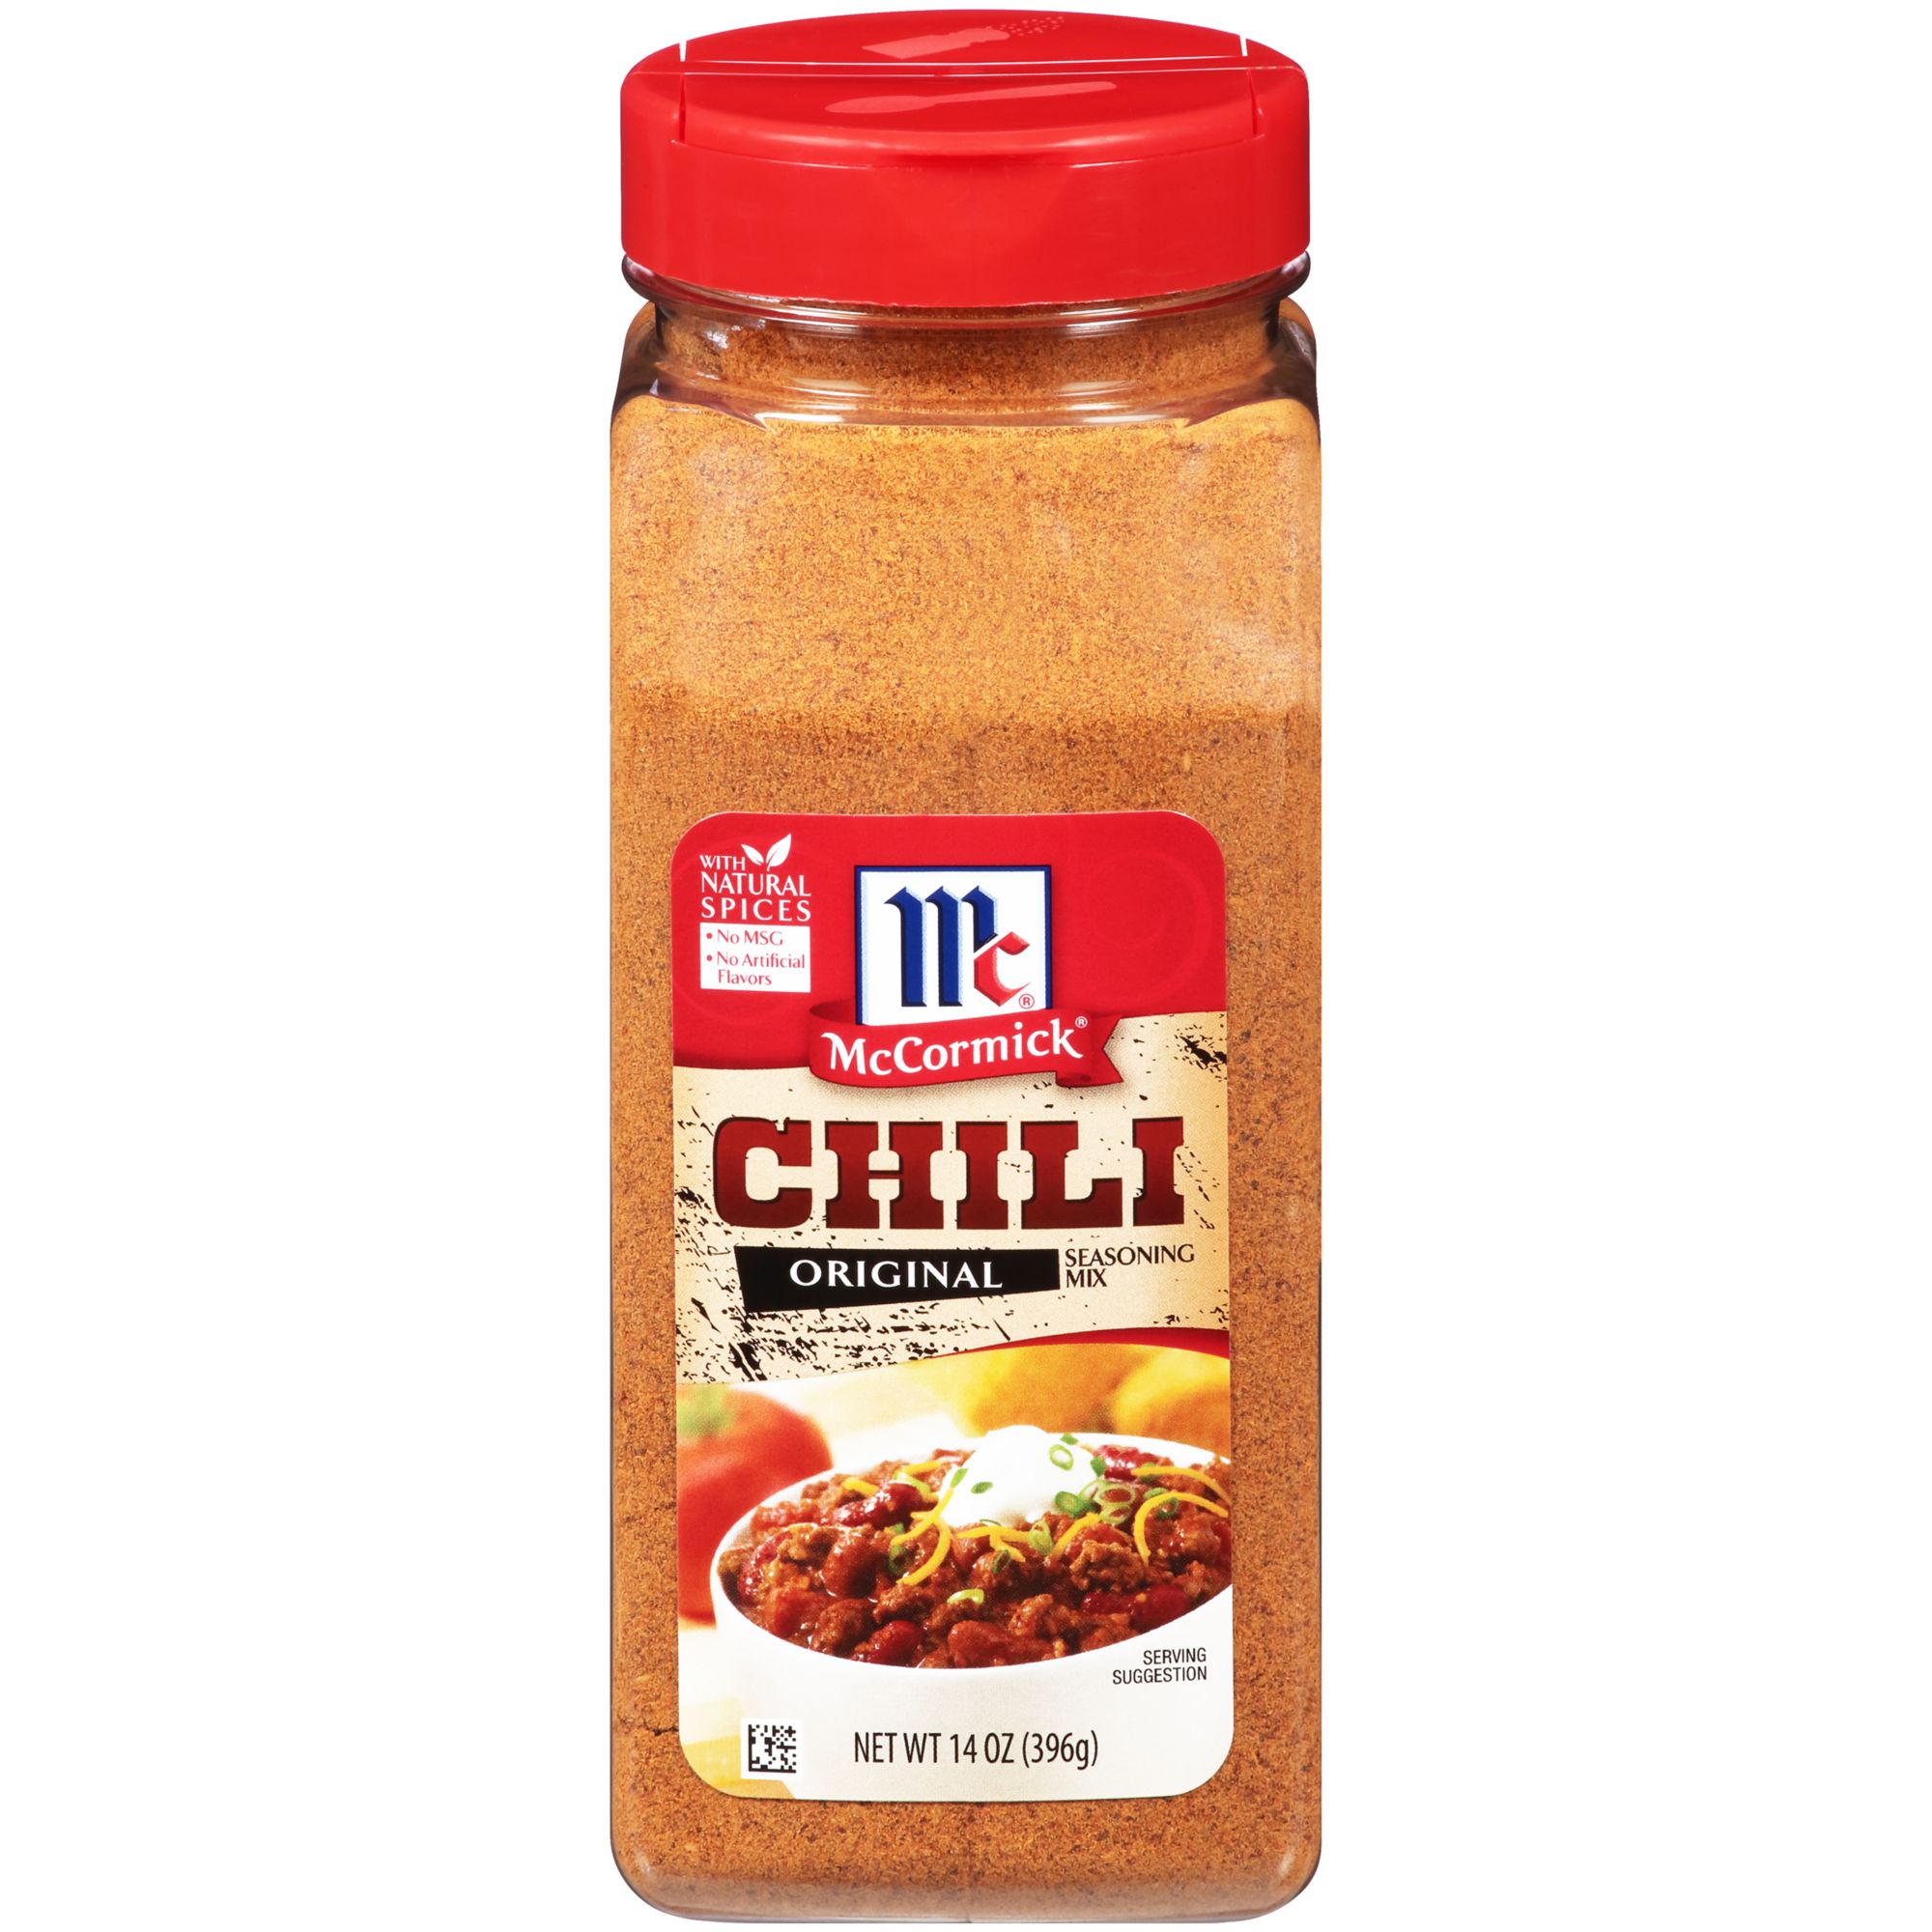 What is the Best Chili Seasoning Packet Mix?